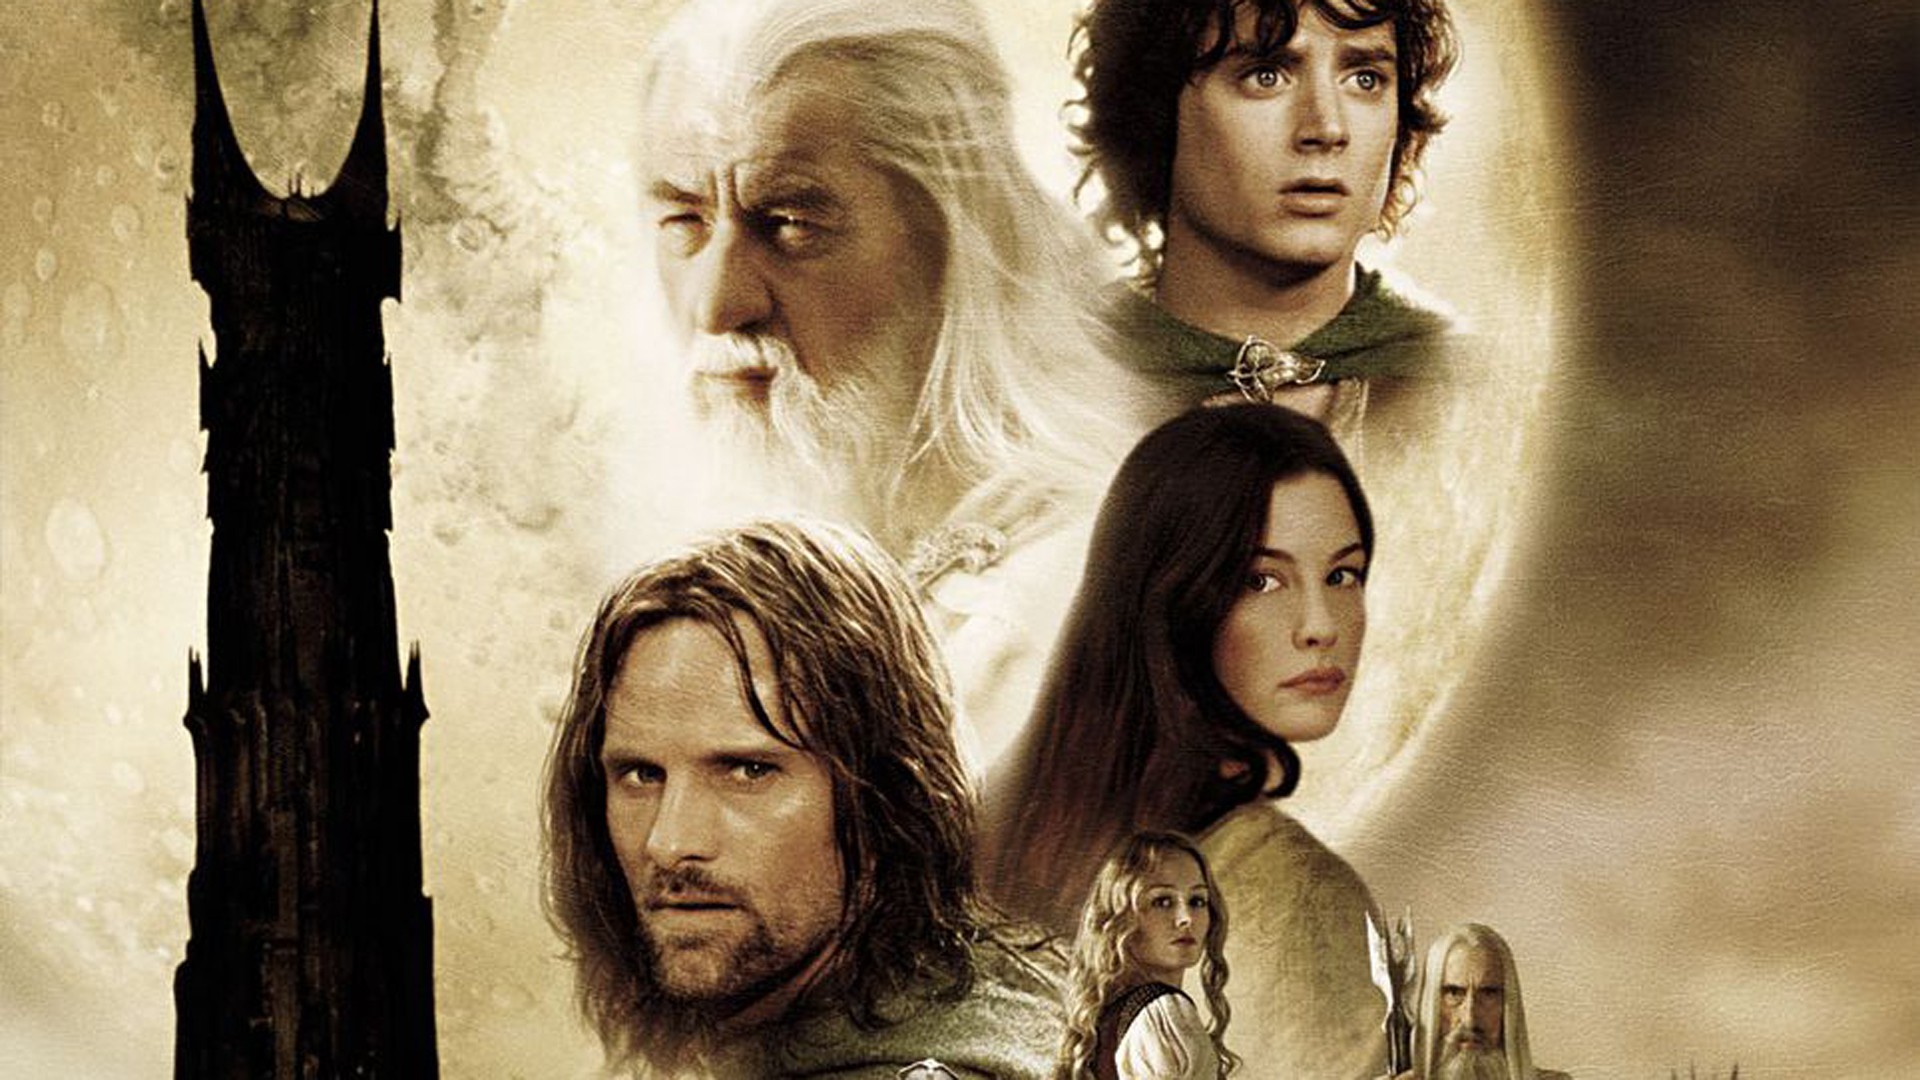 Movies The Lord Of The Rings The Lord Of The Rings The Two Towers Frodo Baggins Gandalf Aragorn Arwe 1920x1080